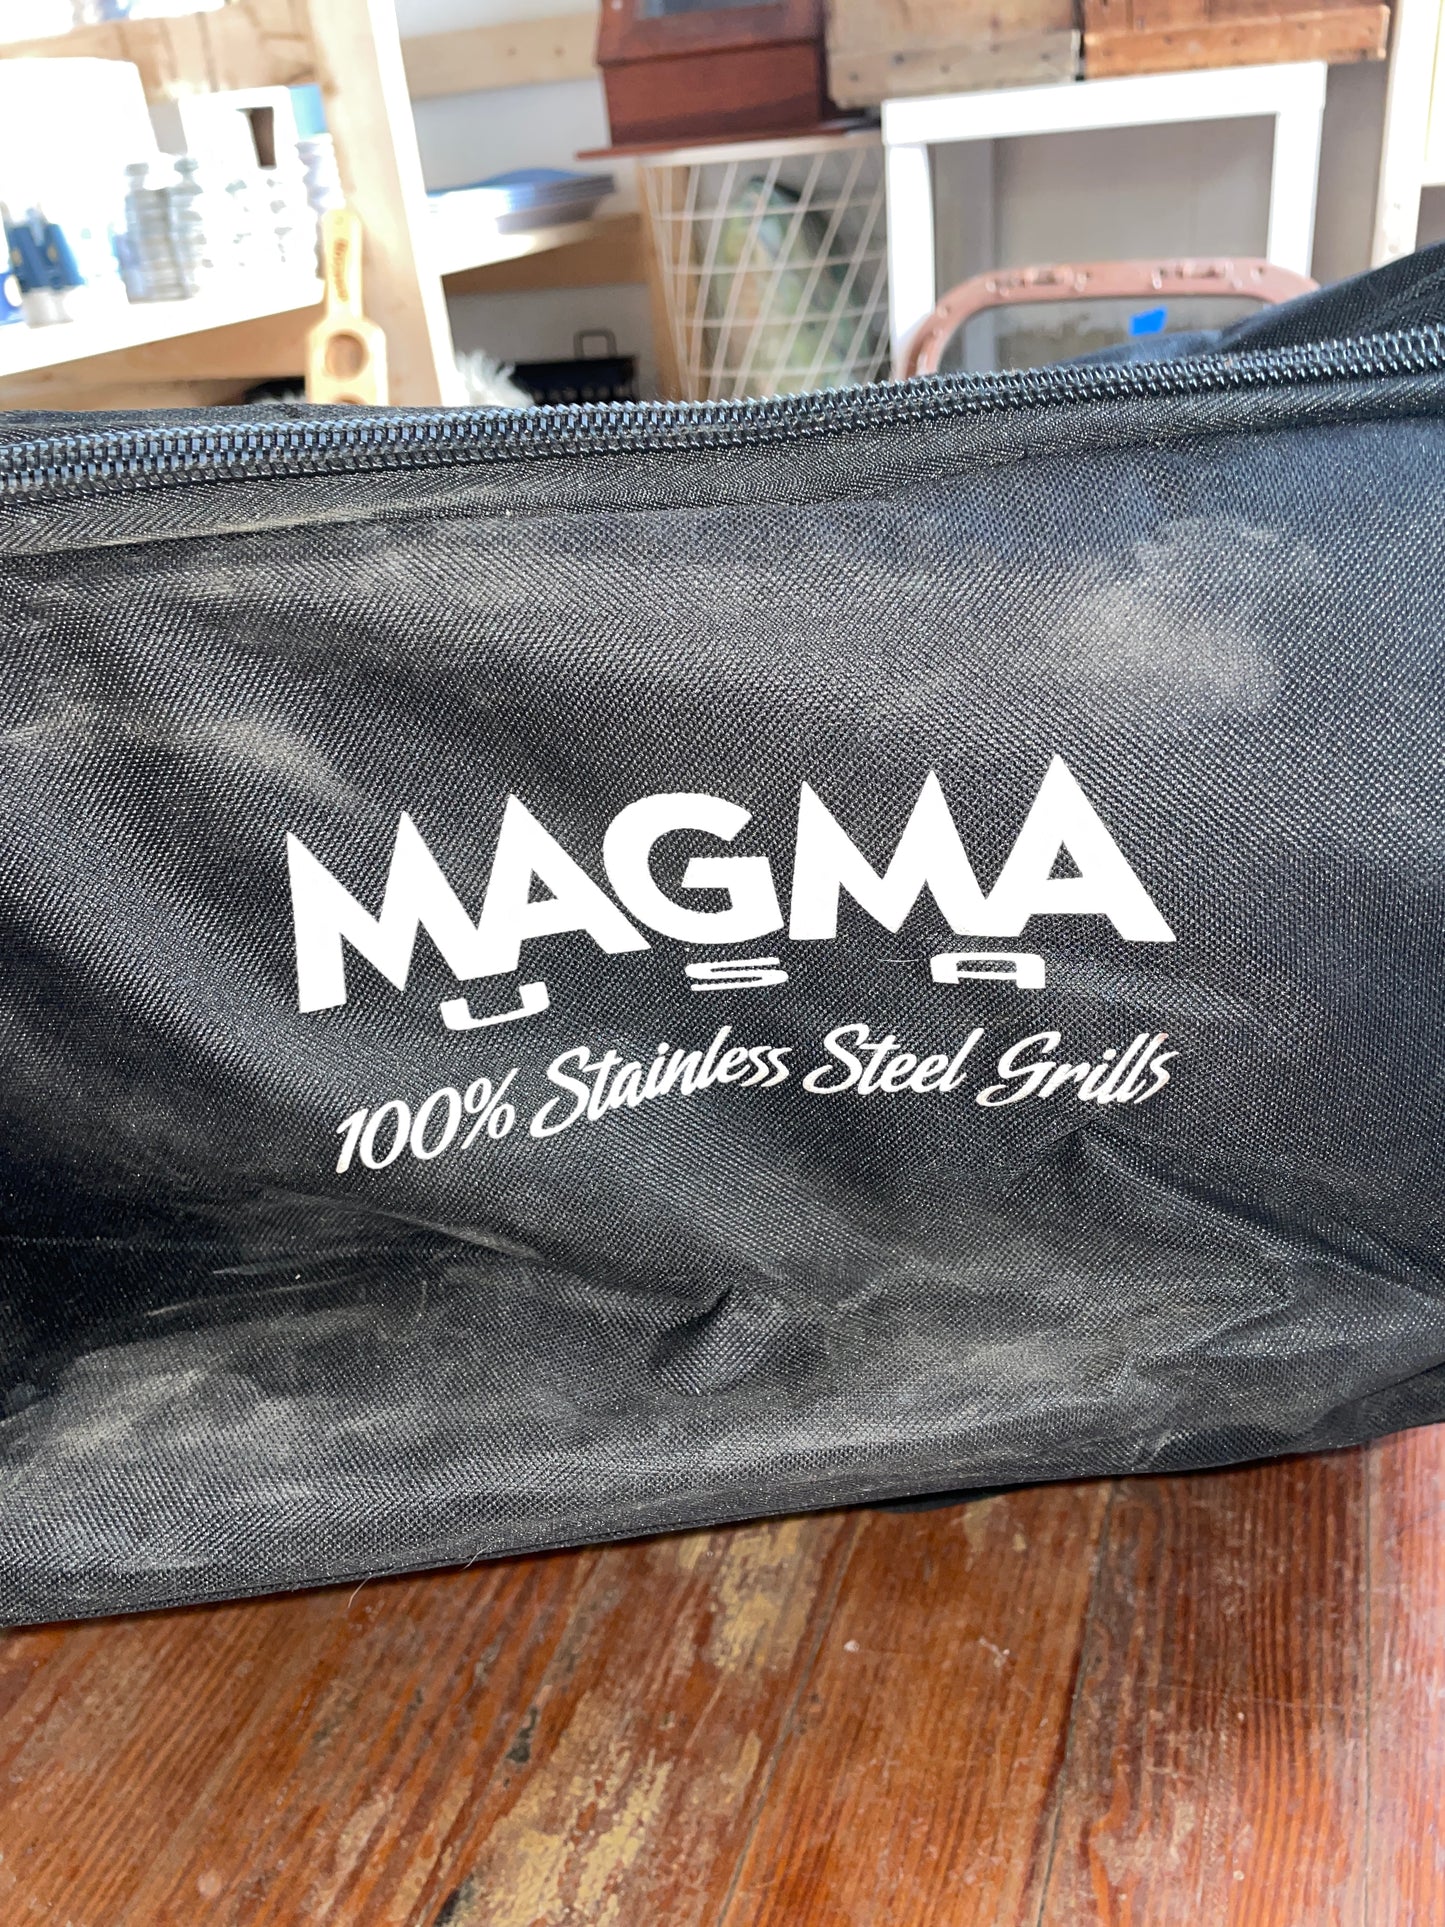 Padded Magma Grill Carrying Case